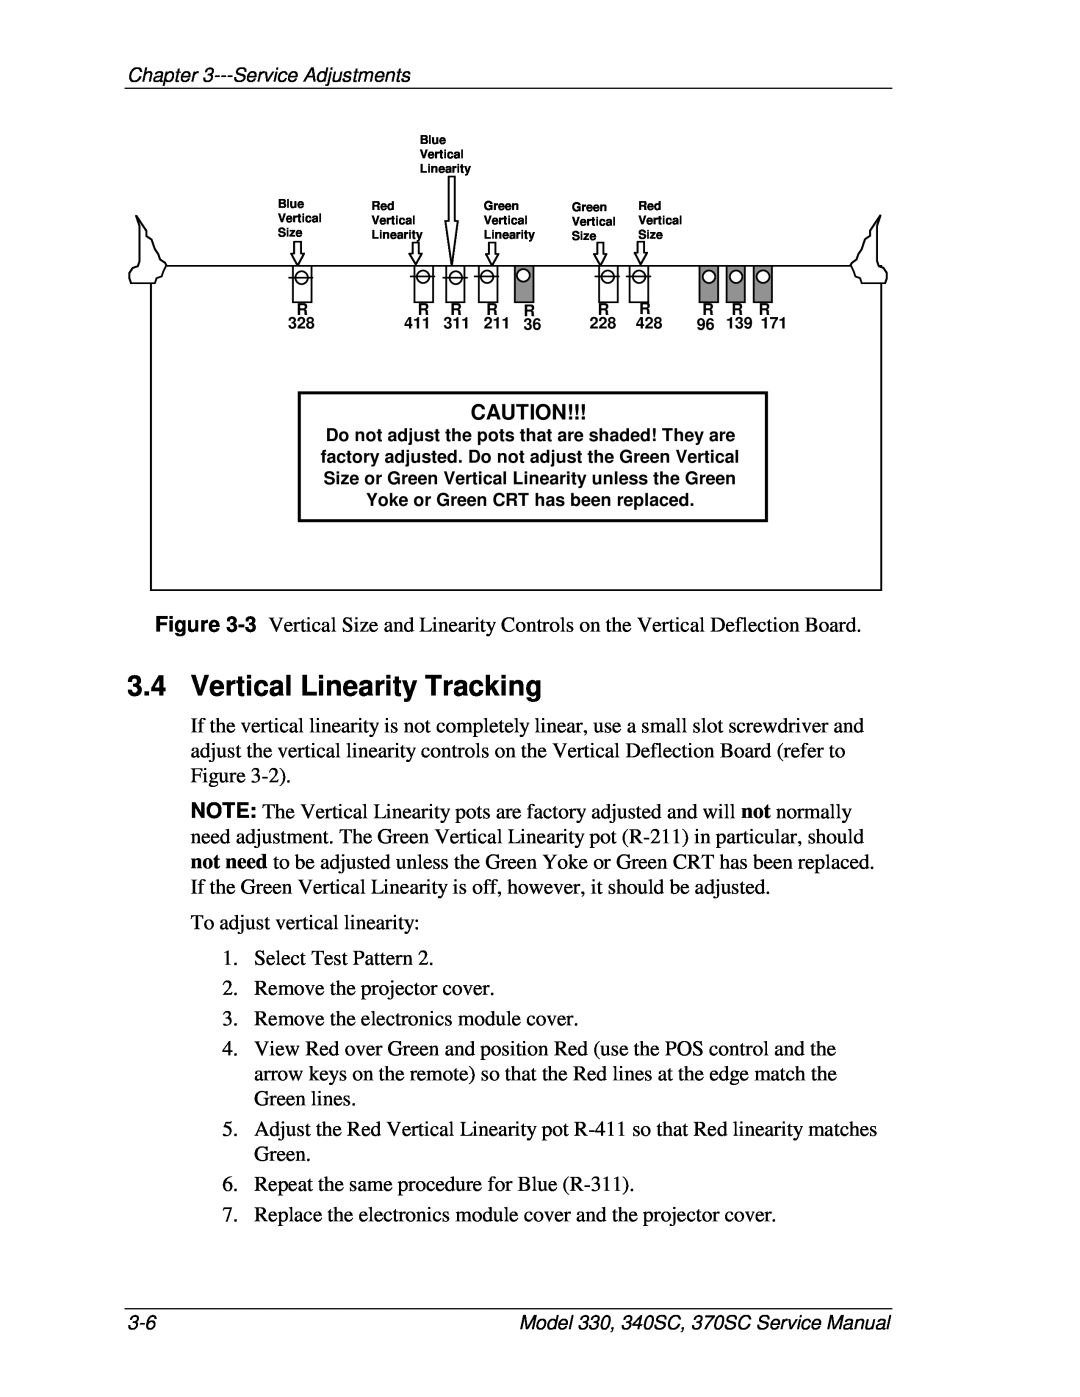 JVC 330, 370 SC, 340 SC service manual Vertical Linearity Tracking 